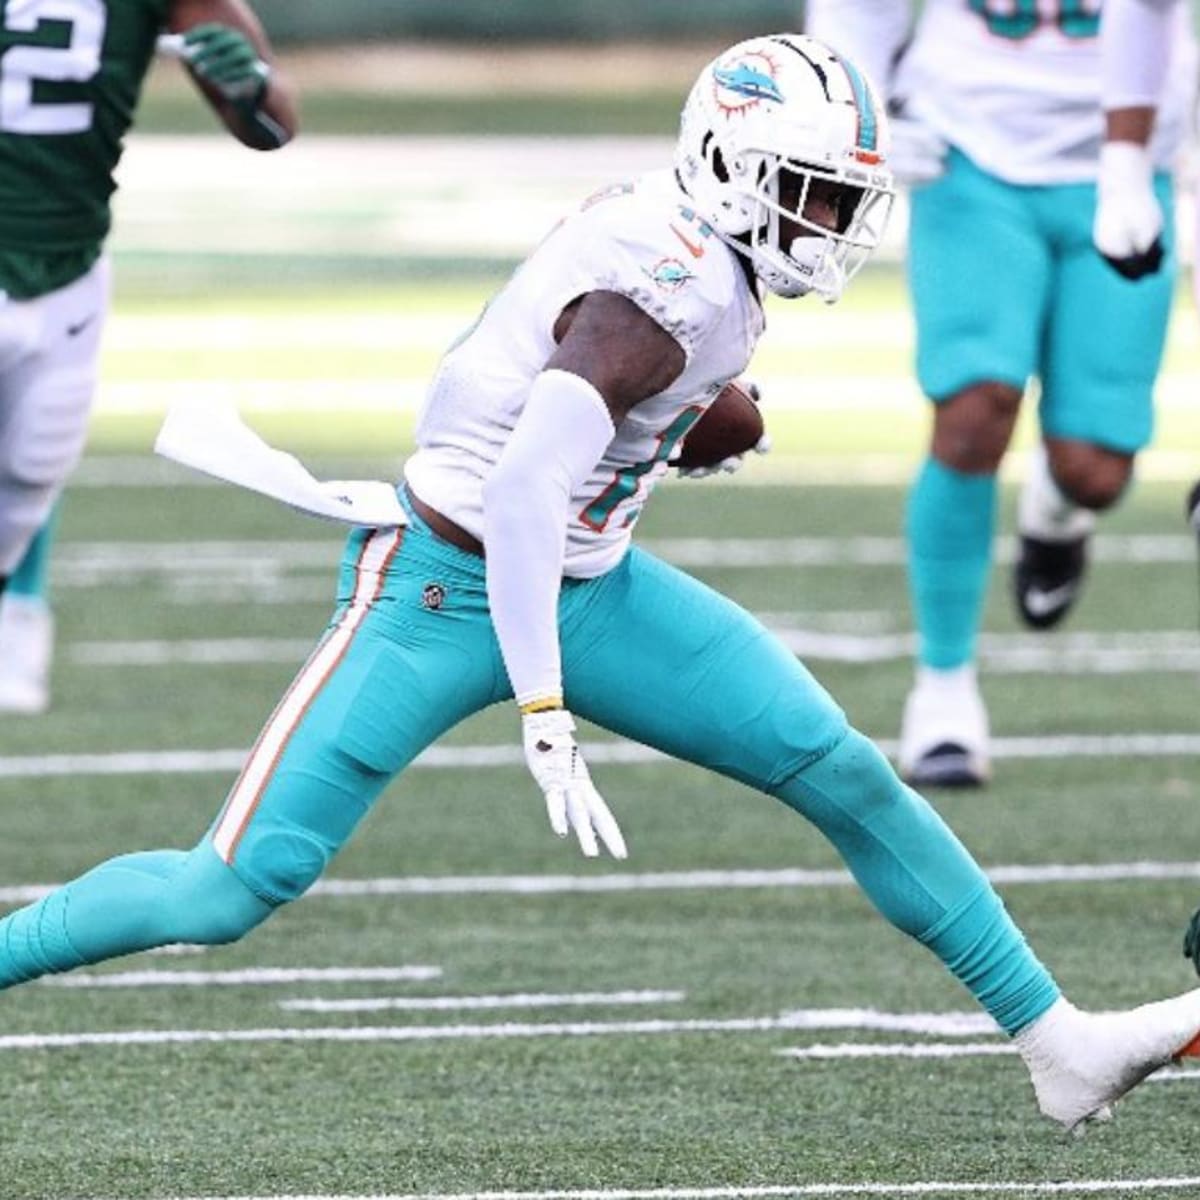 Patriots news: New England lands DeVante Parker in trade with Dolphins